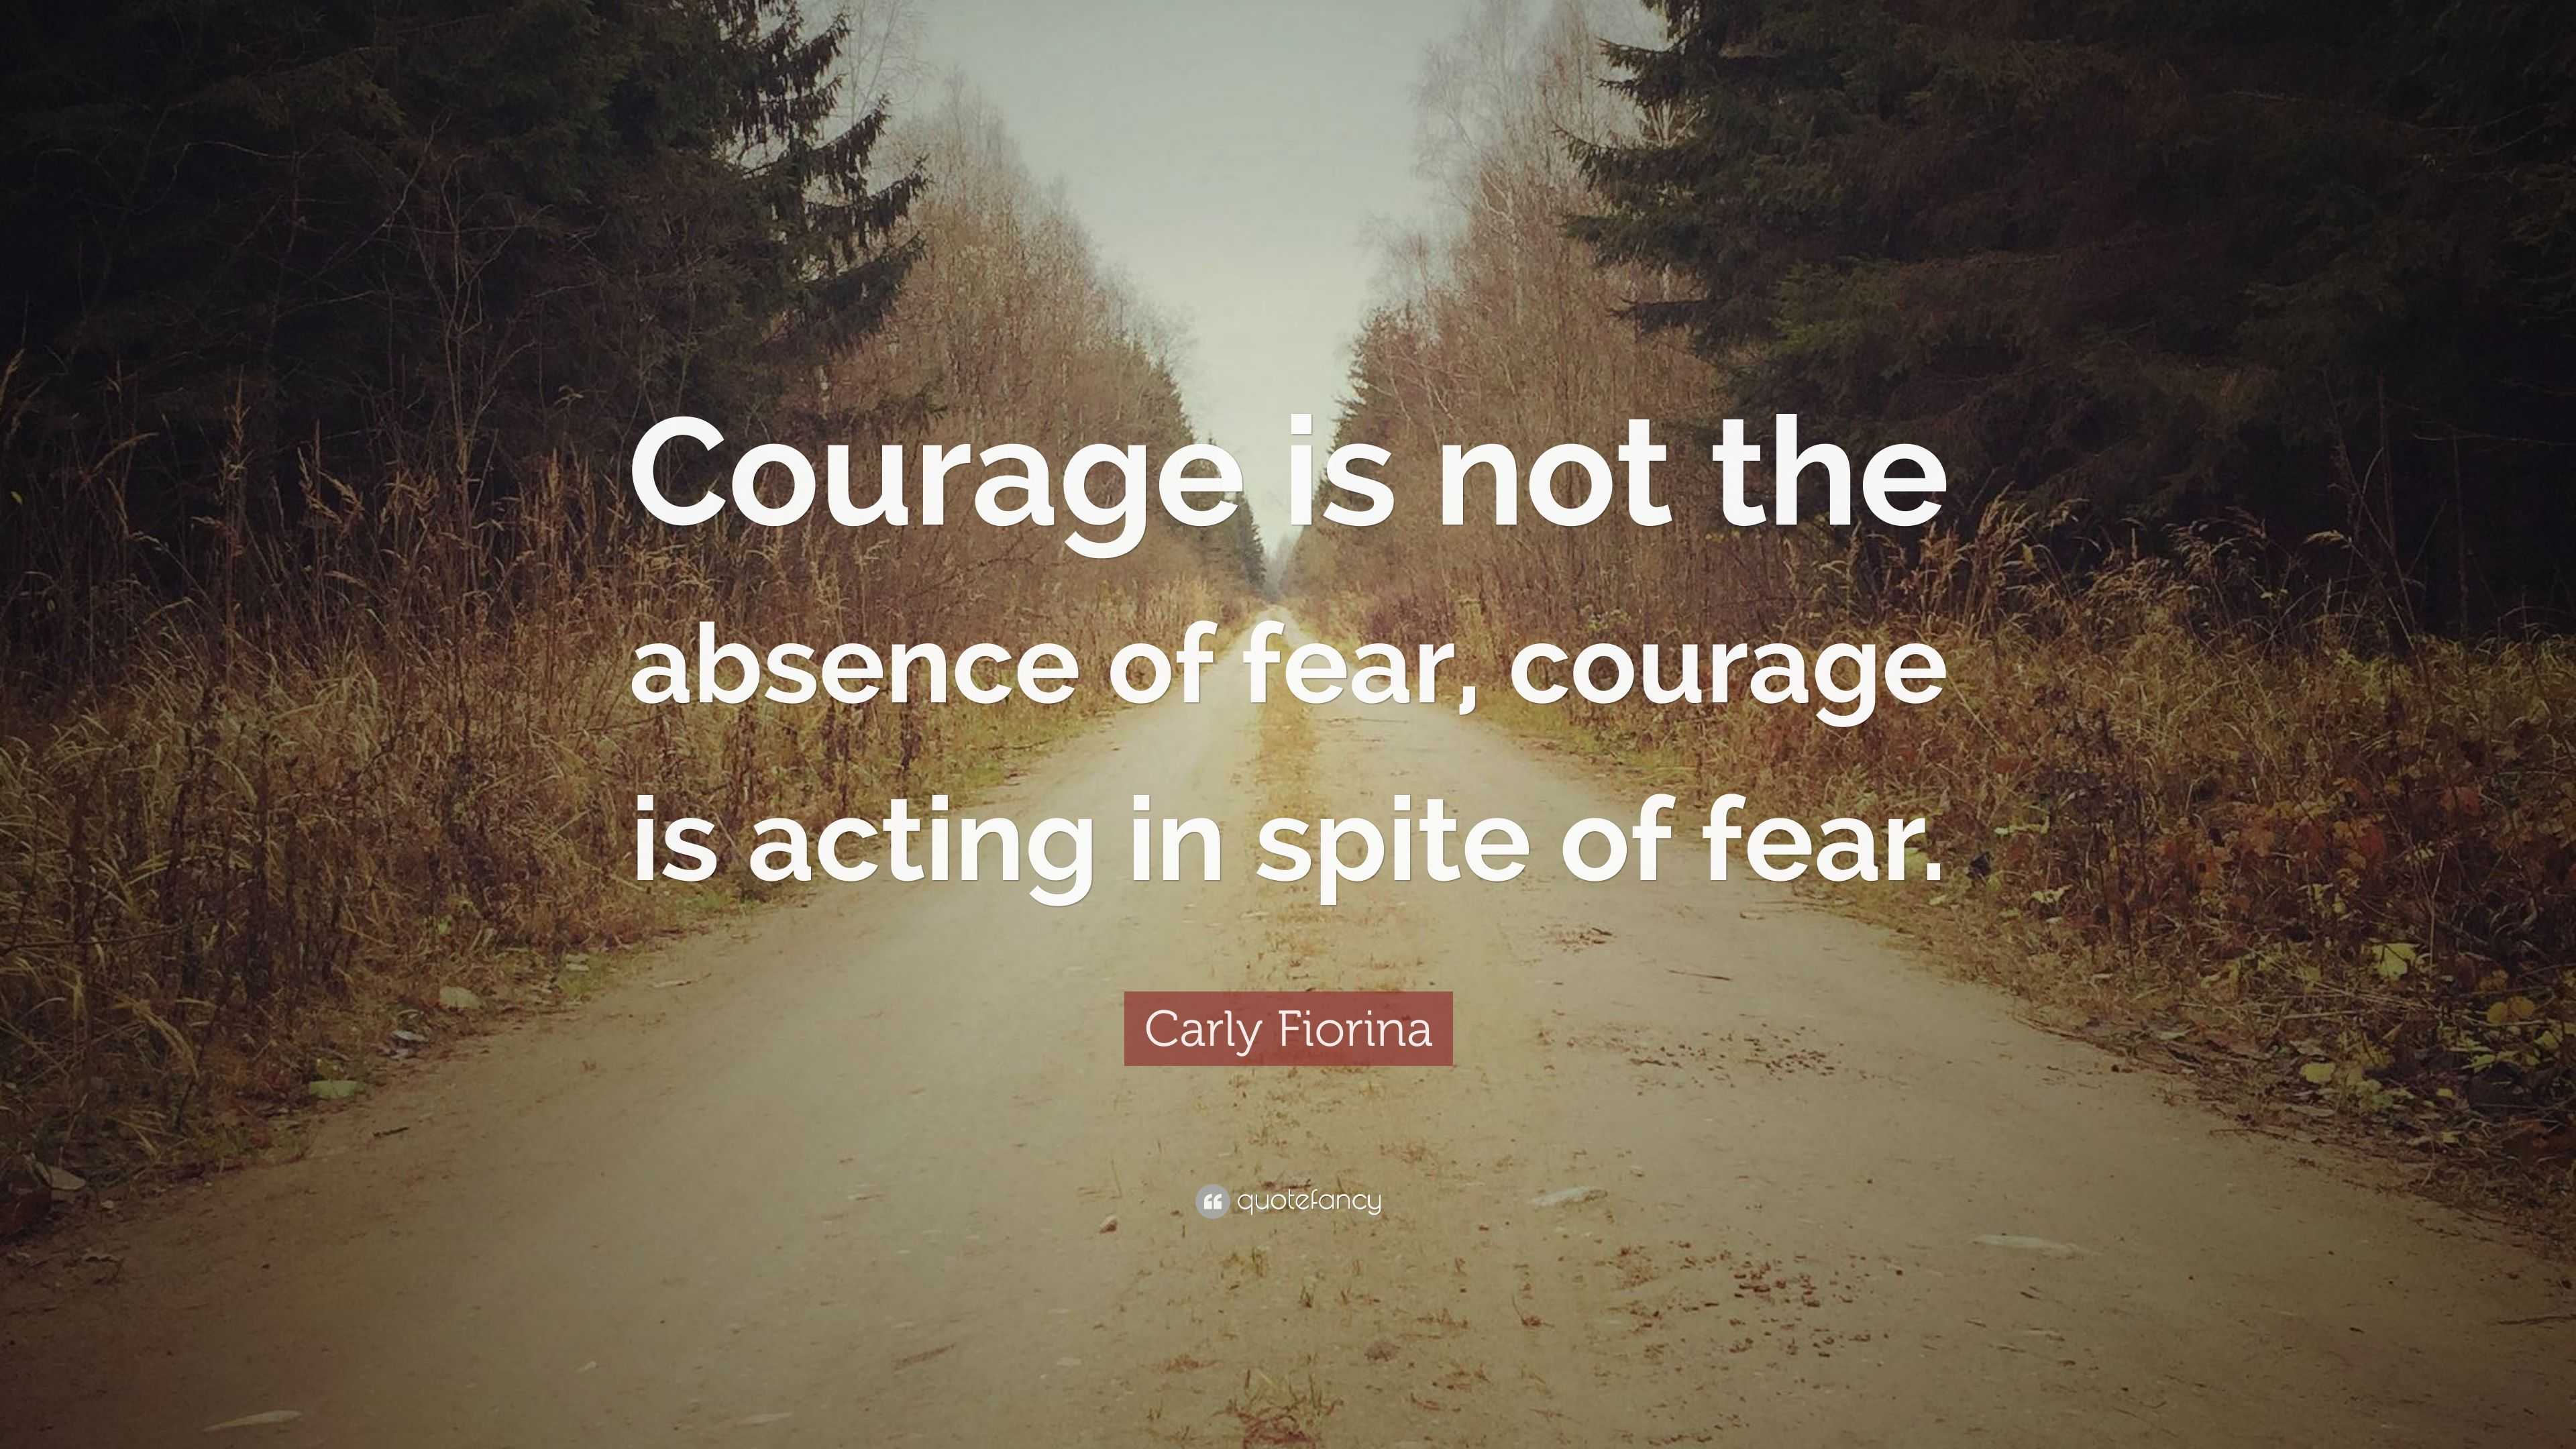 Carly Fiorina Quote: “Courage is not the absence of fear, courage is ...